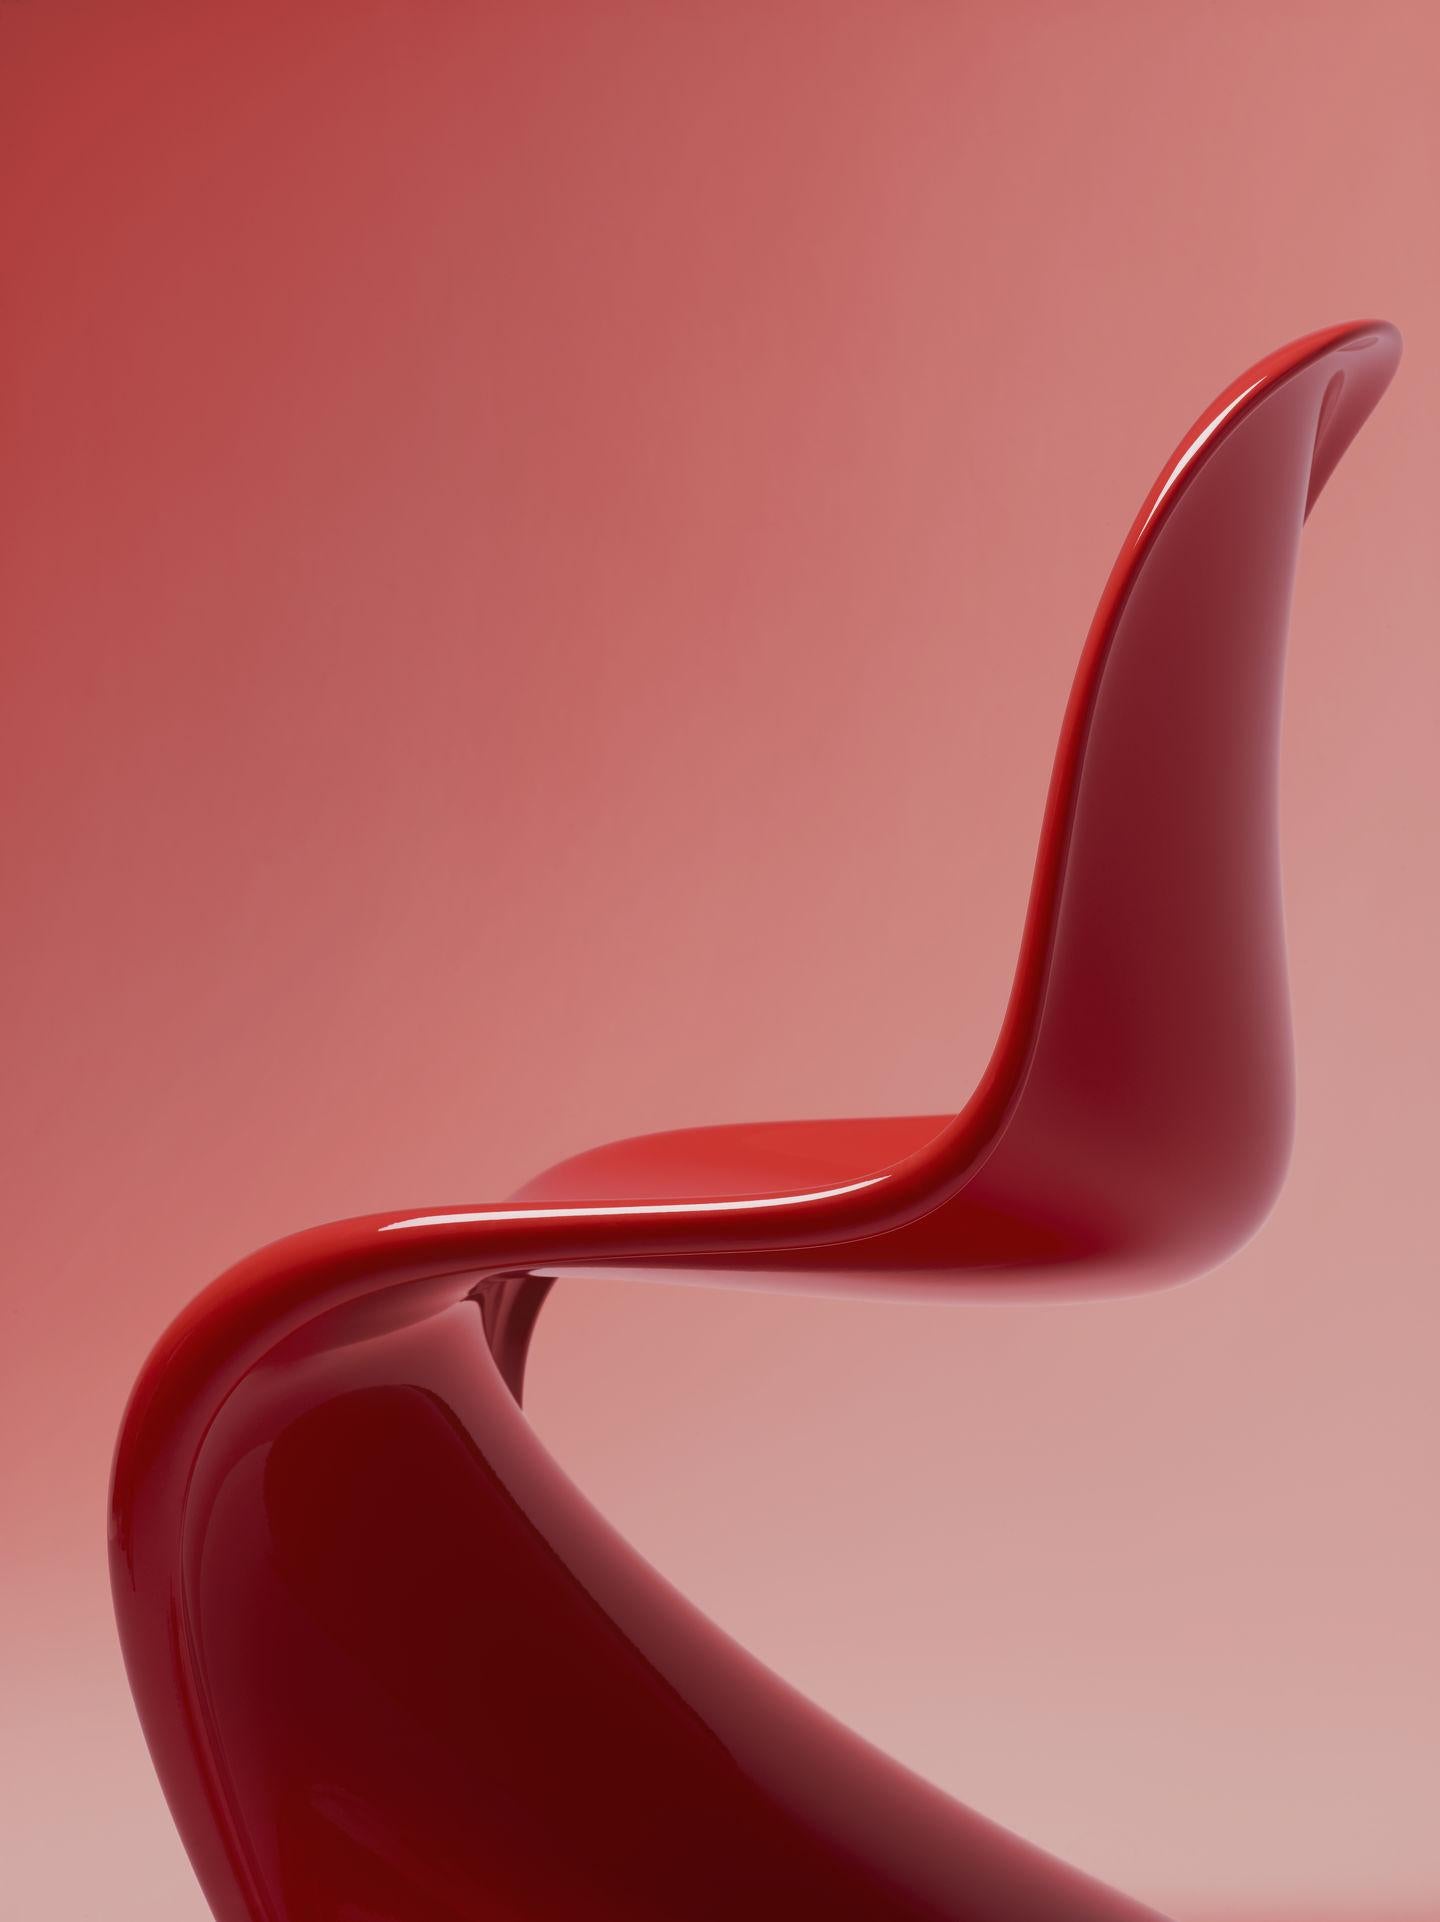 Contemporary Panton Chair Classic Designed by Verner Panton and Manufactured by Vitra